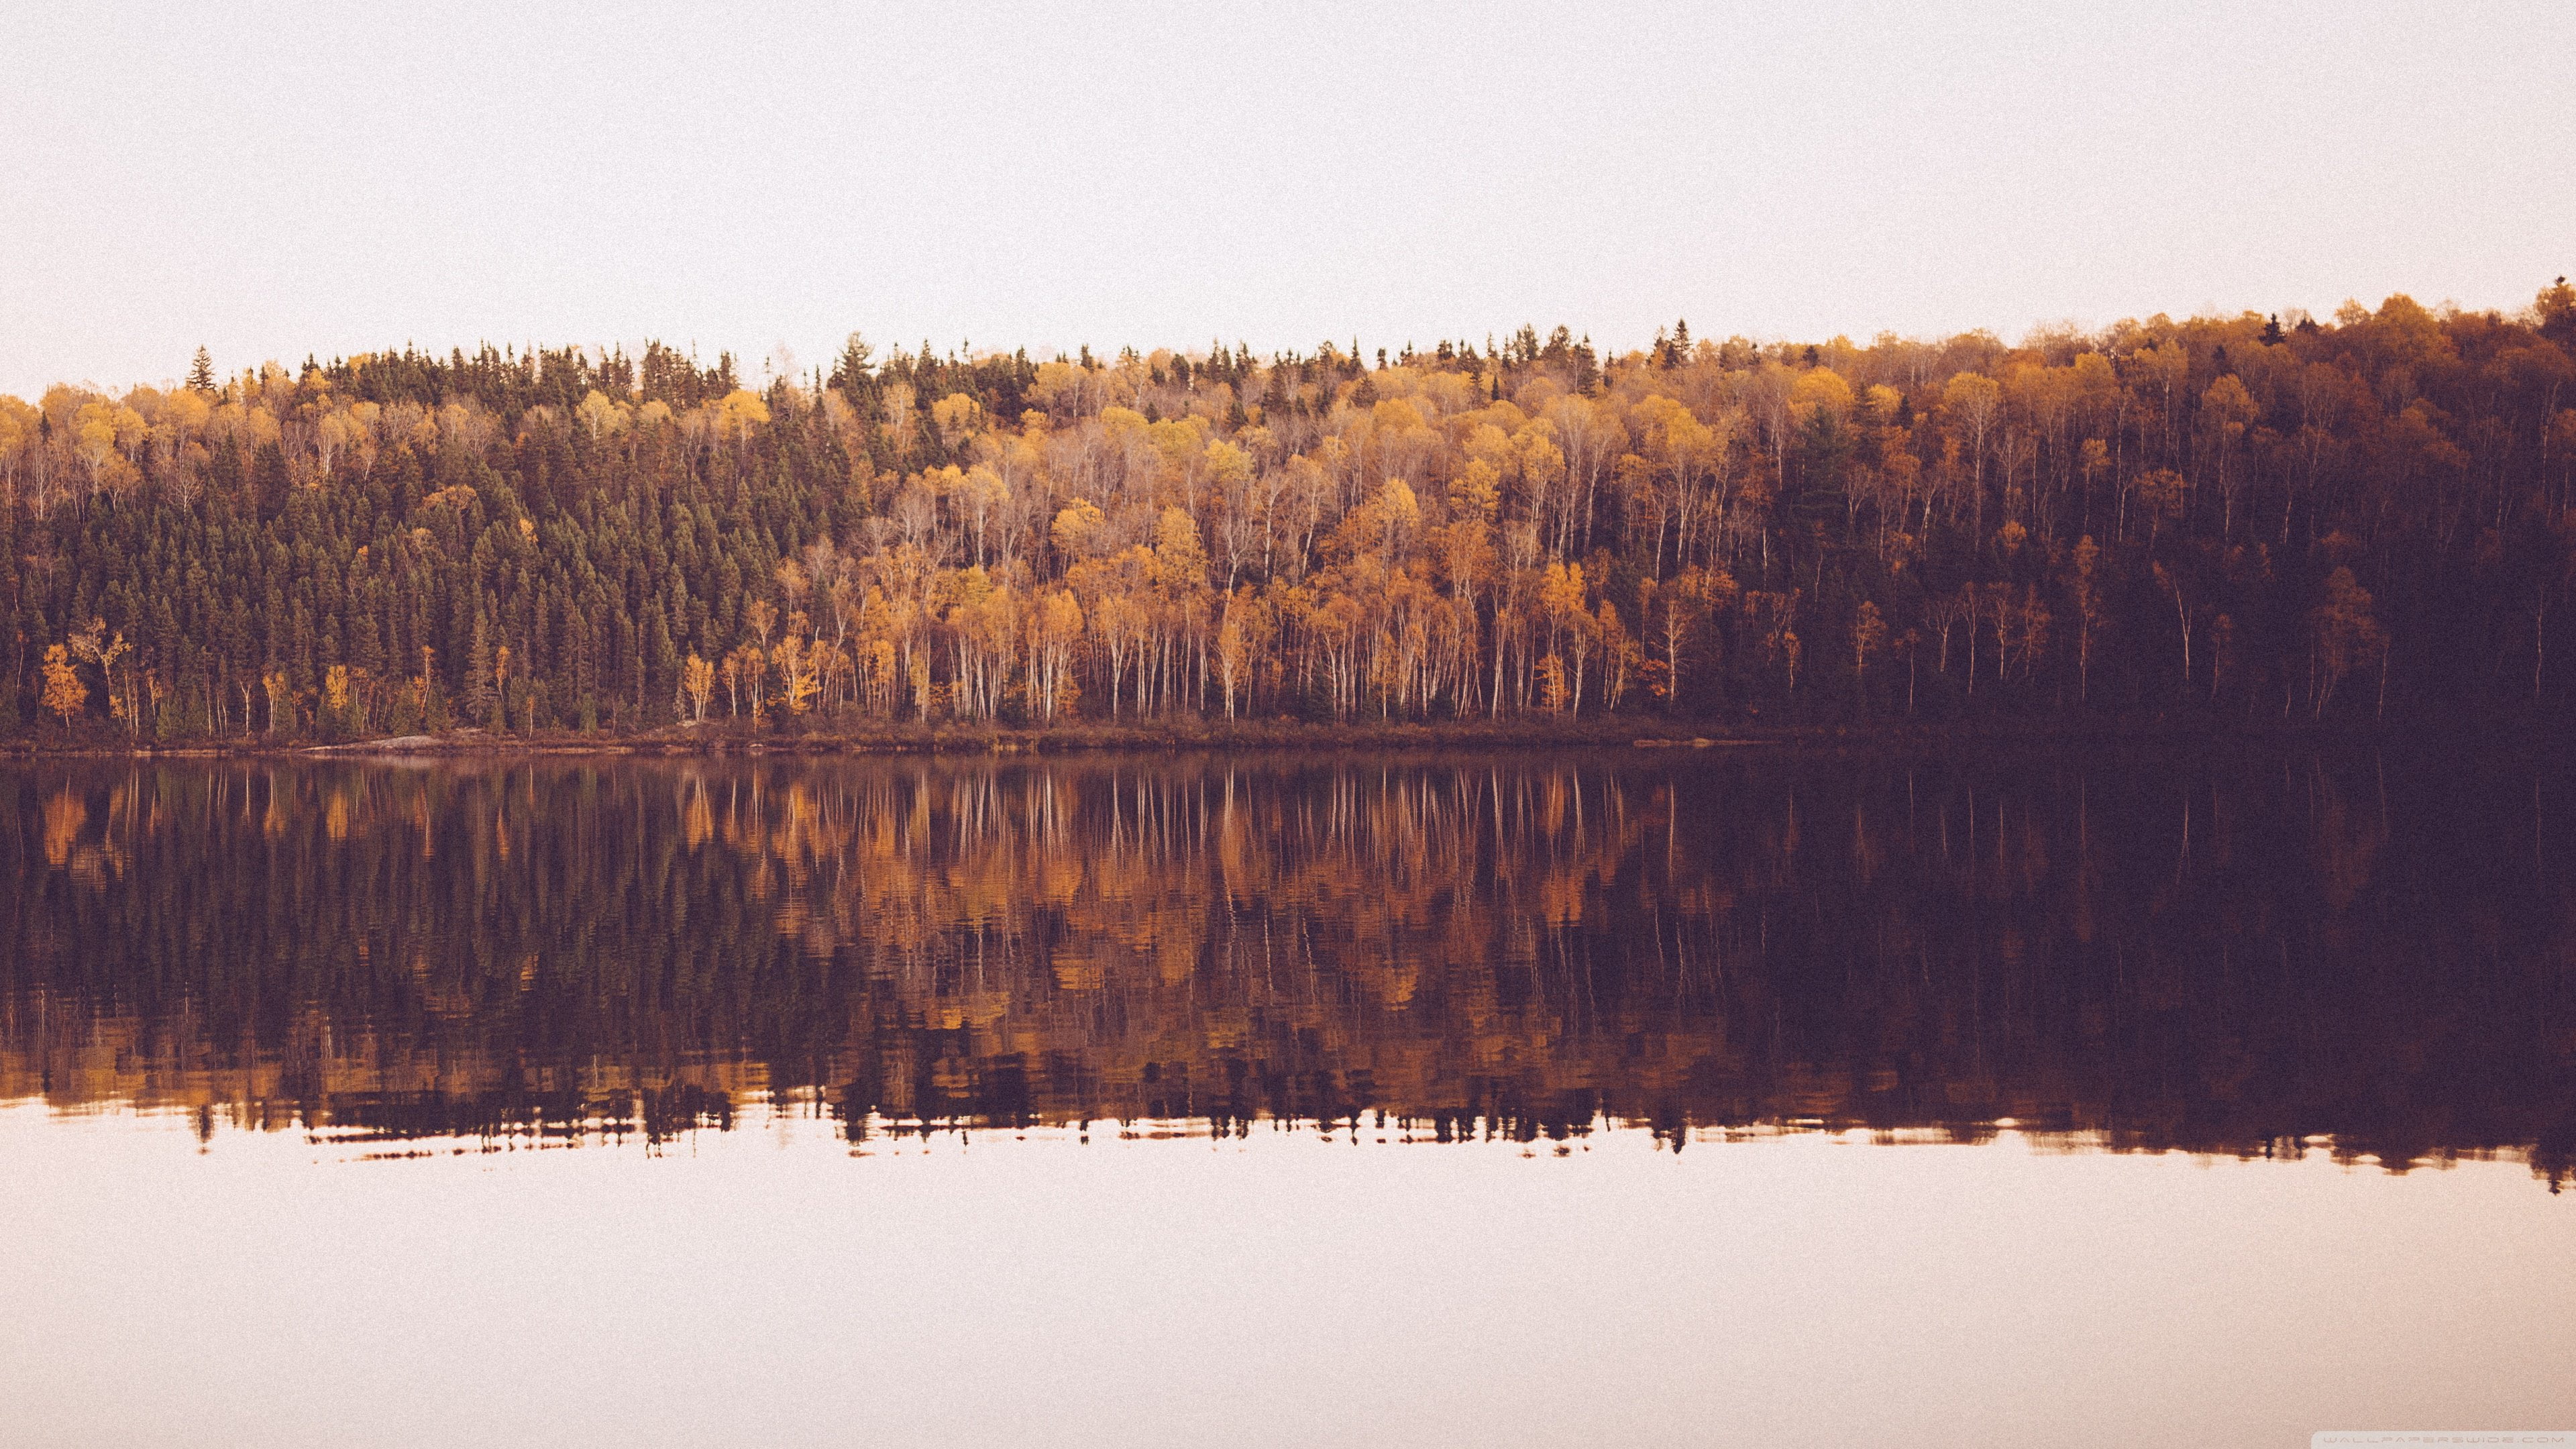 treeline by body of water photography, landscape, photography, forest